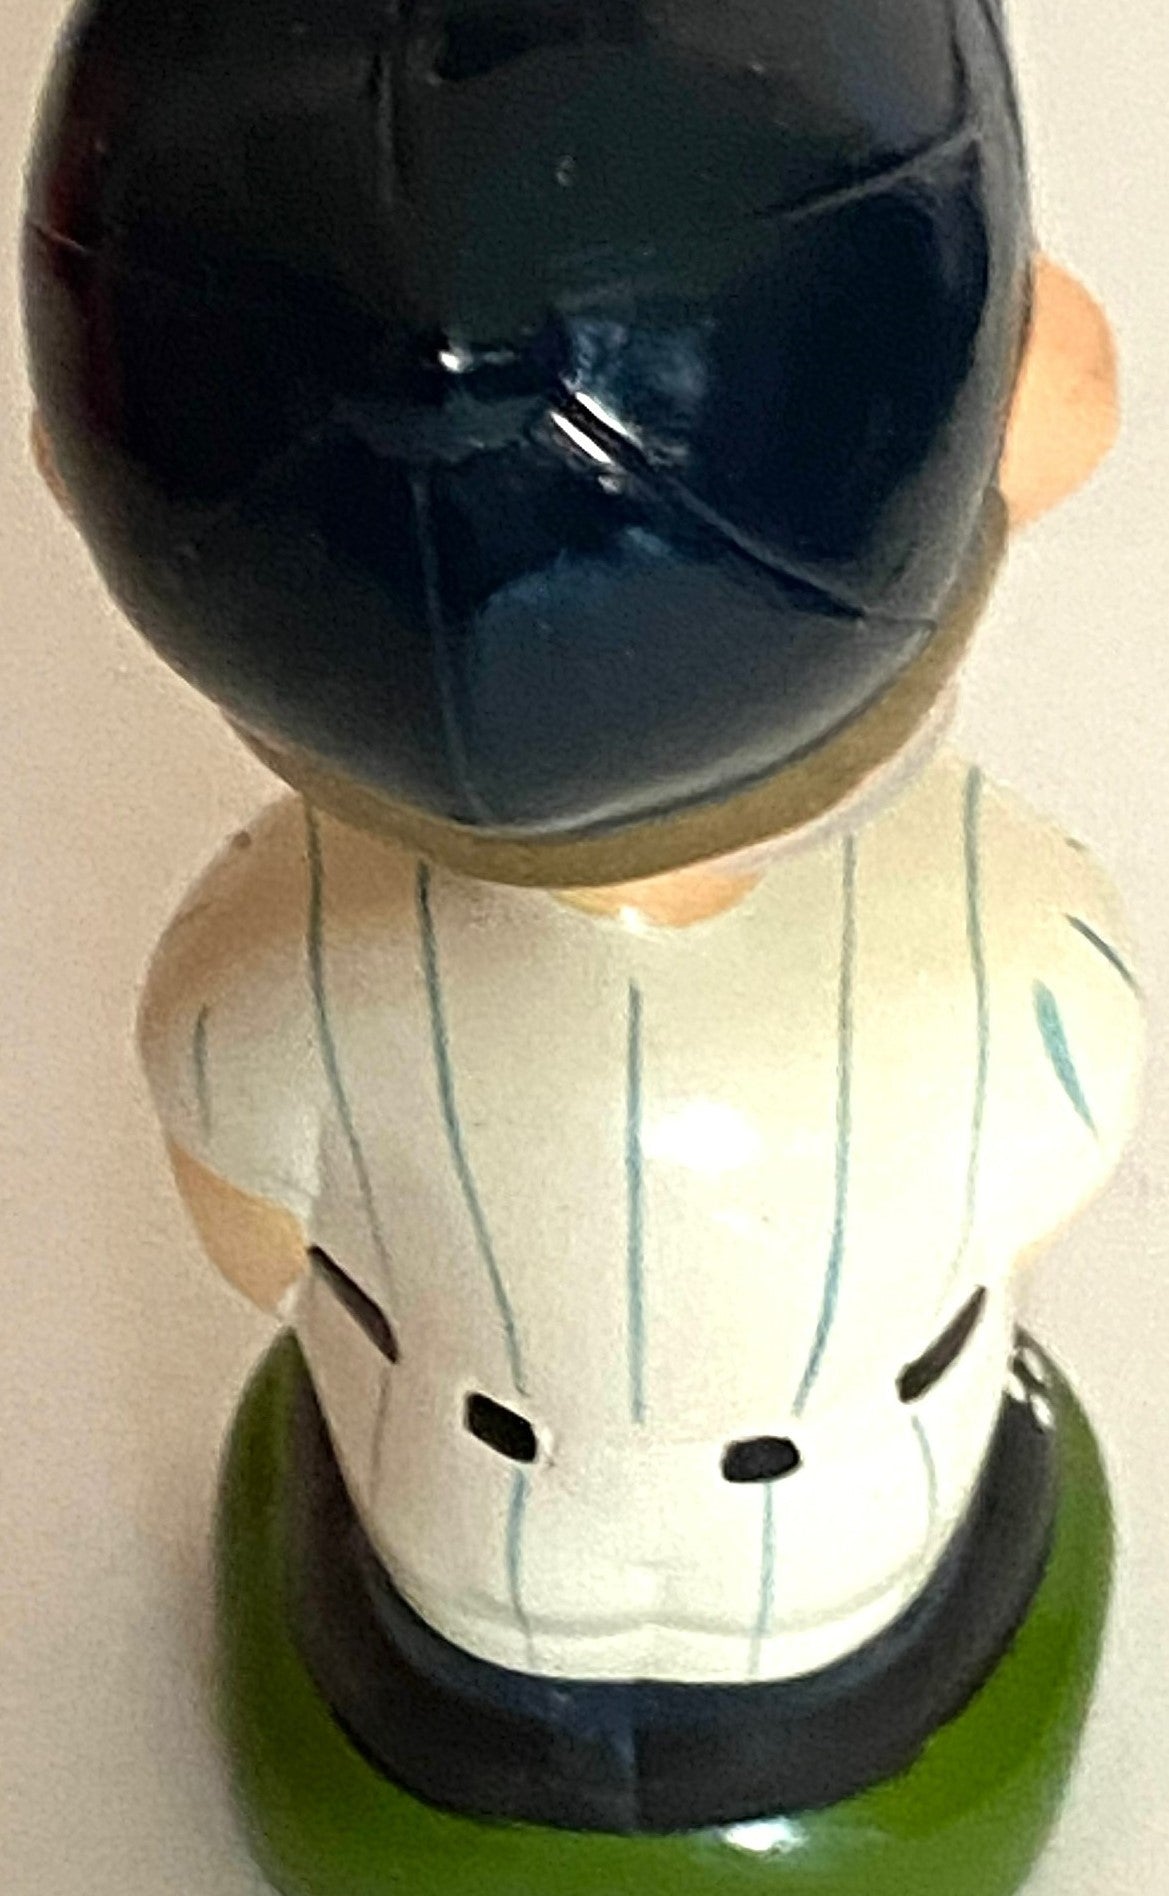 Mobile BayBears 1999 Minor League Bobblehead (Used/Very Nice) by Twins Enterprise